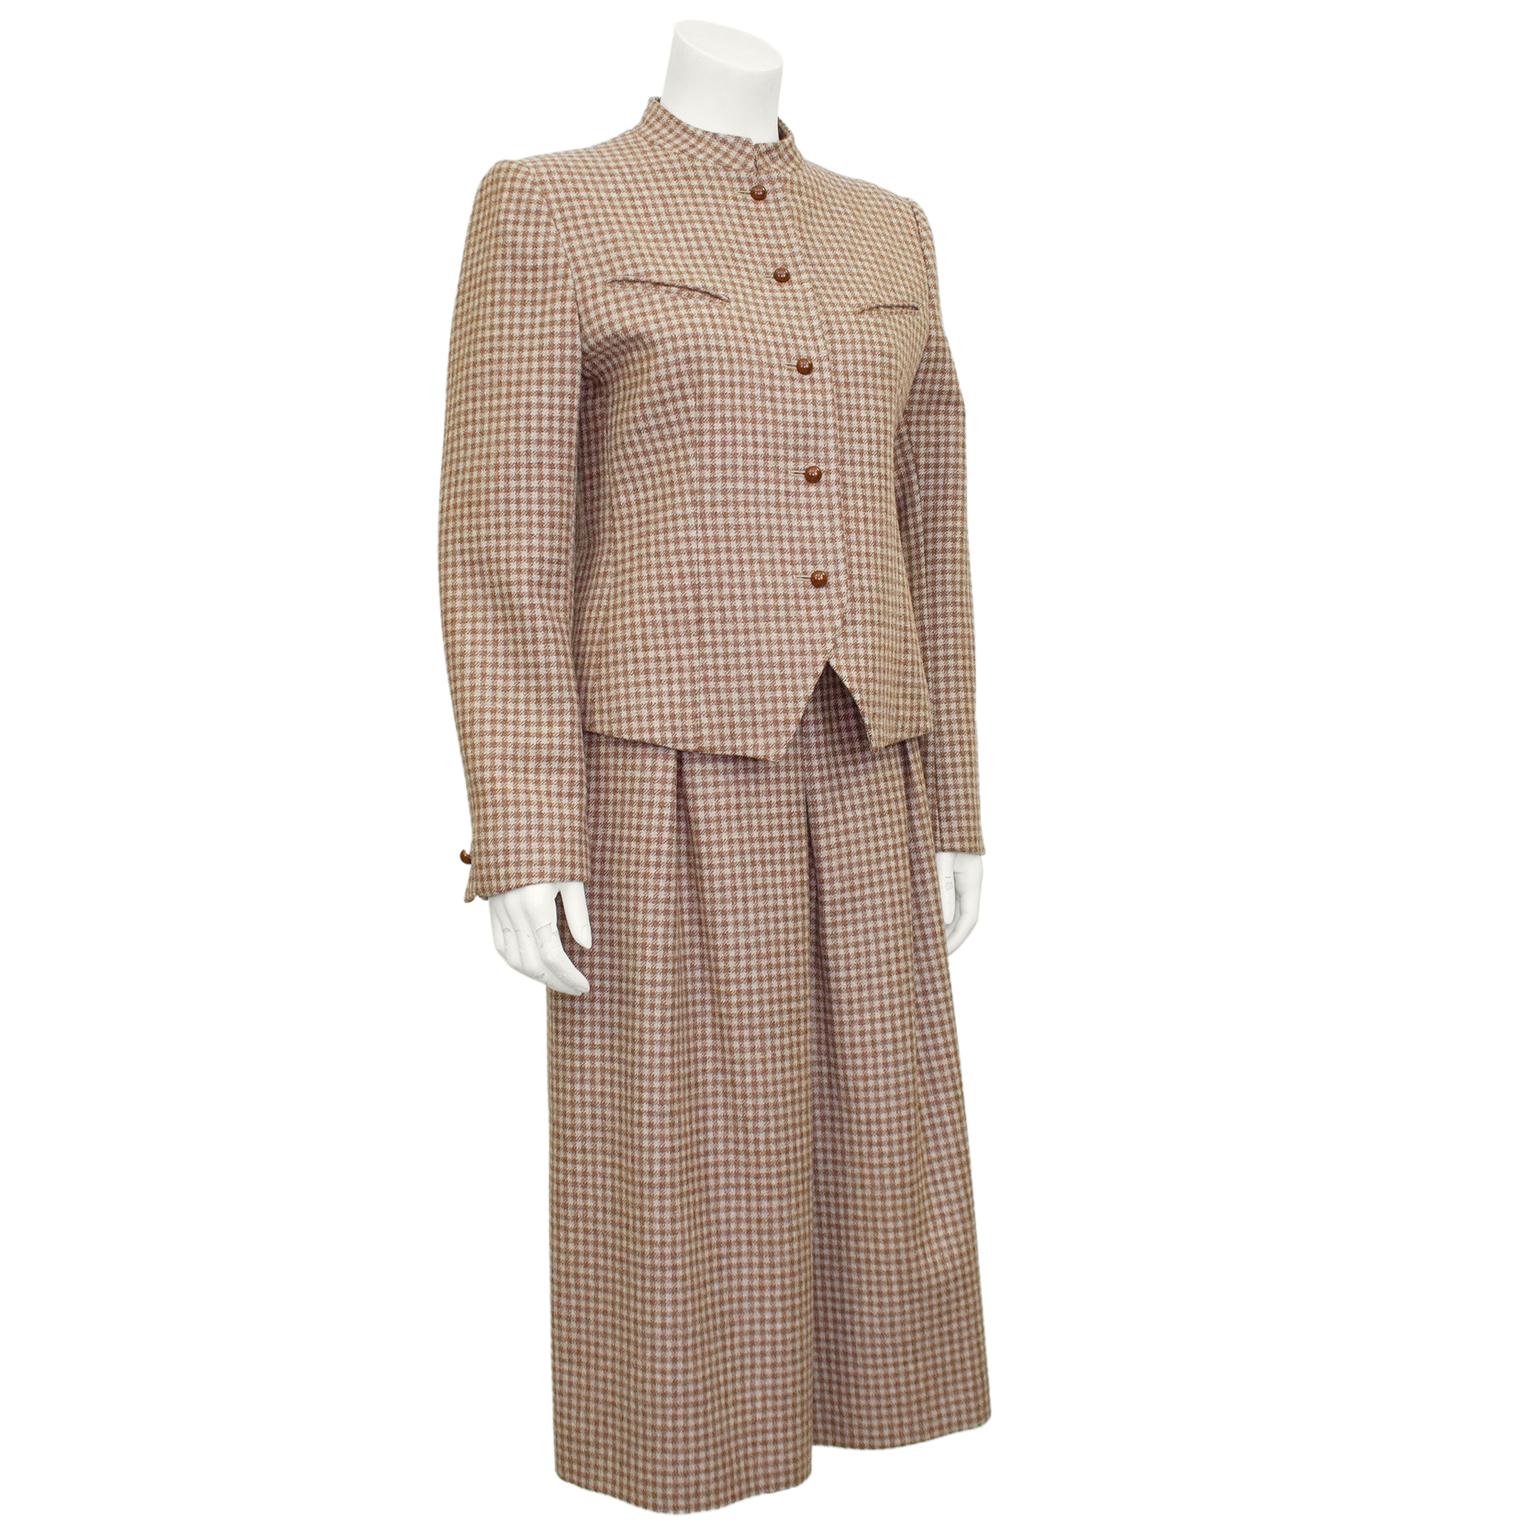 Lovely Guy Laroche Diffusion skirt suit from the 1970’s. Brown and beige wool plaid with chocolate brown plastic dome buttons. Collarless with diagonal slit pockets and darts at bust and small triangular cutout at hem. Skirt is high waisted a-line